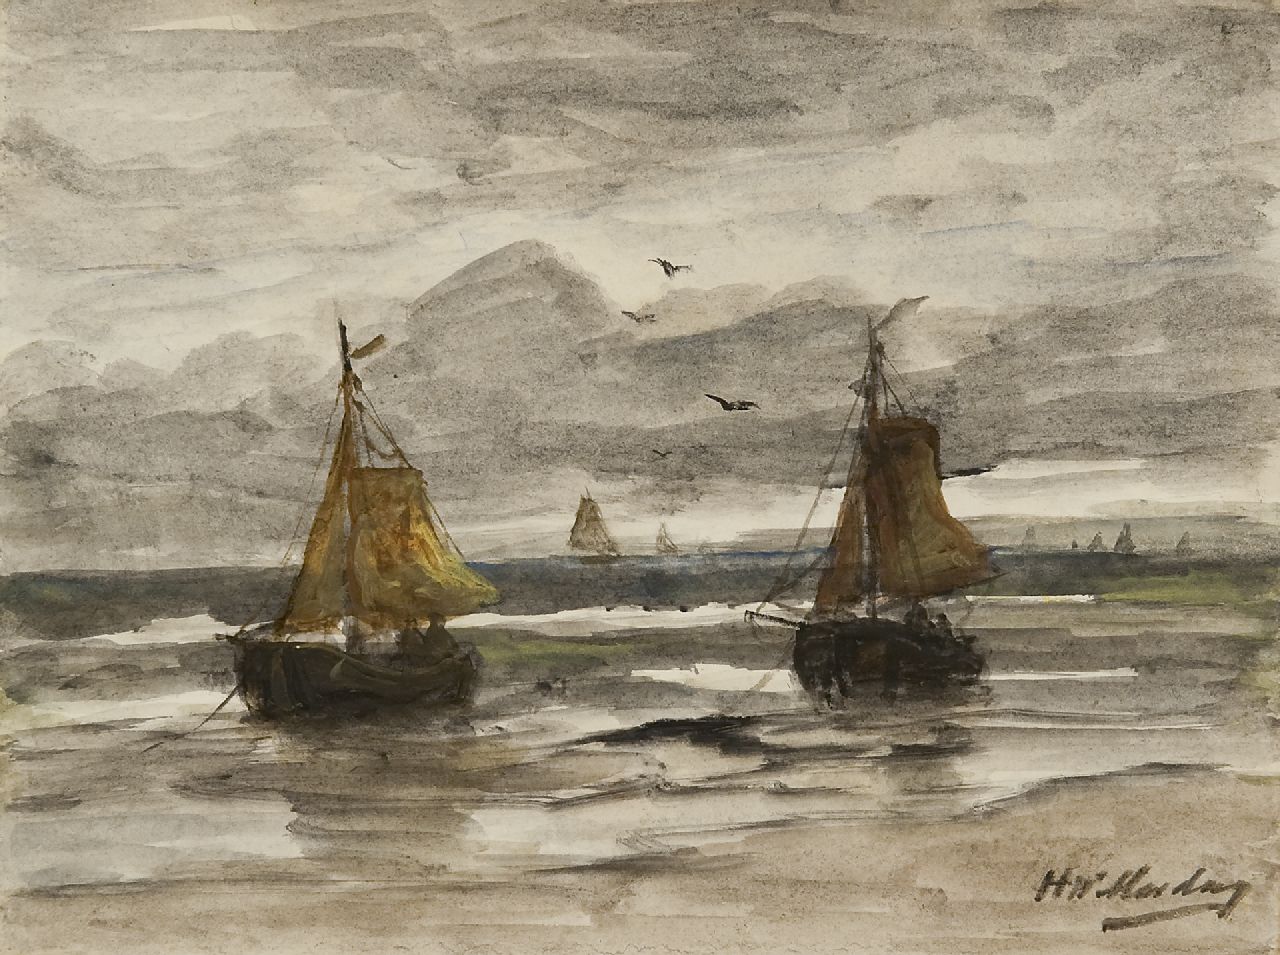 Mesdag H.W.  | Hendrik Willem Mesdag, Two fishing barges at anchor in the surf, Aquarell auf Papier 18,1 x 24,1 cm, signed l.r.